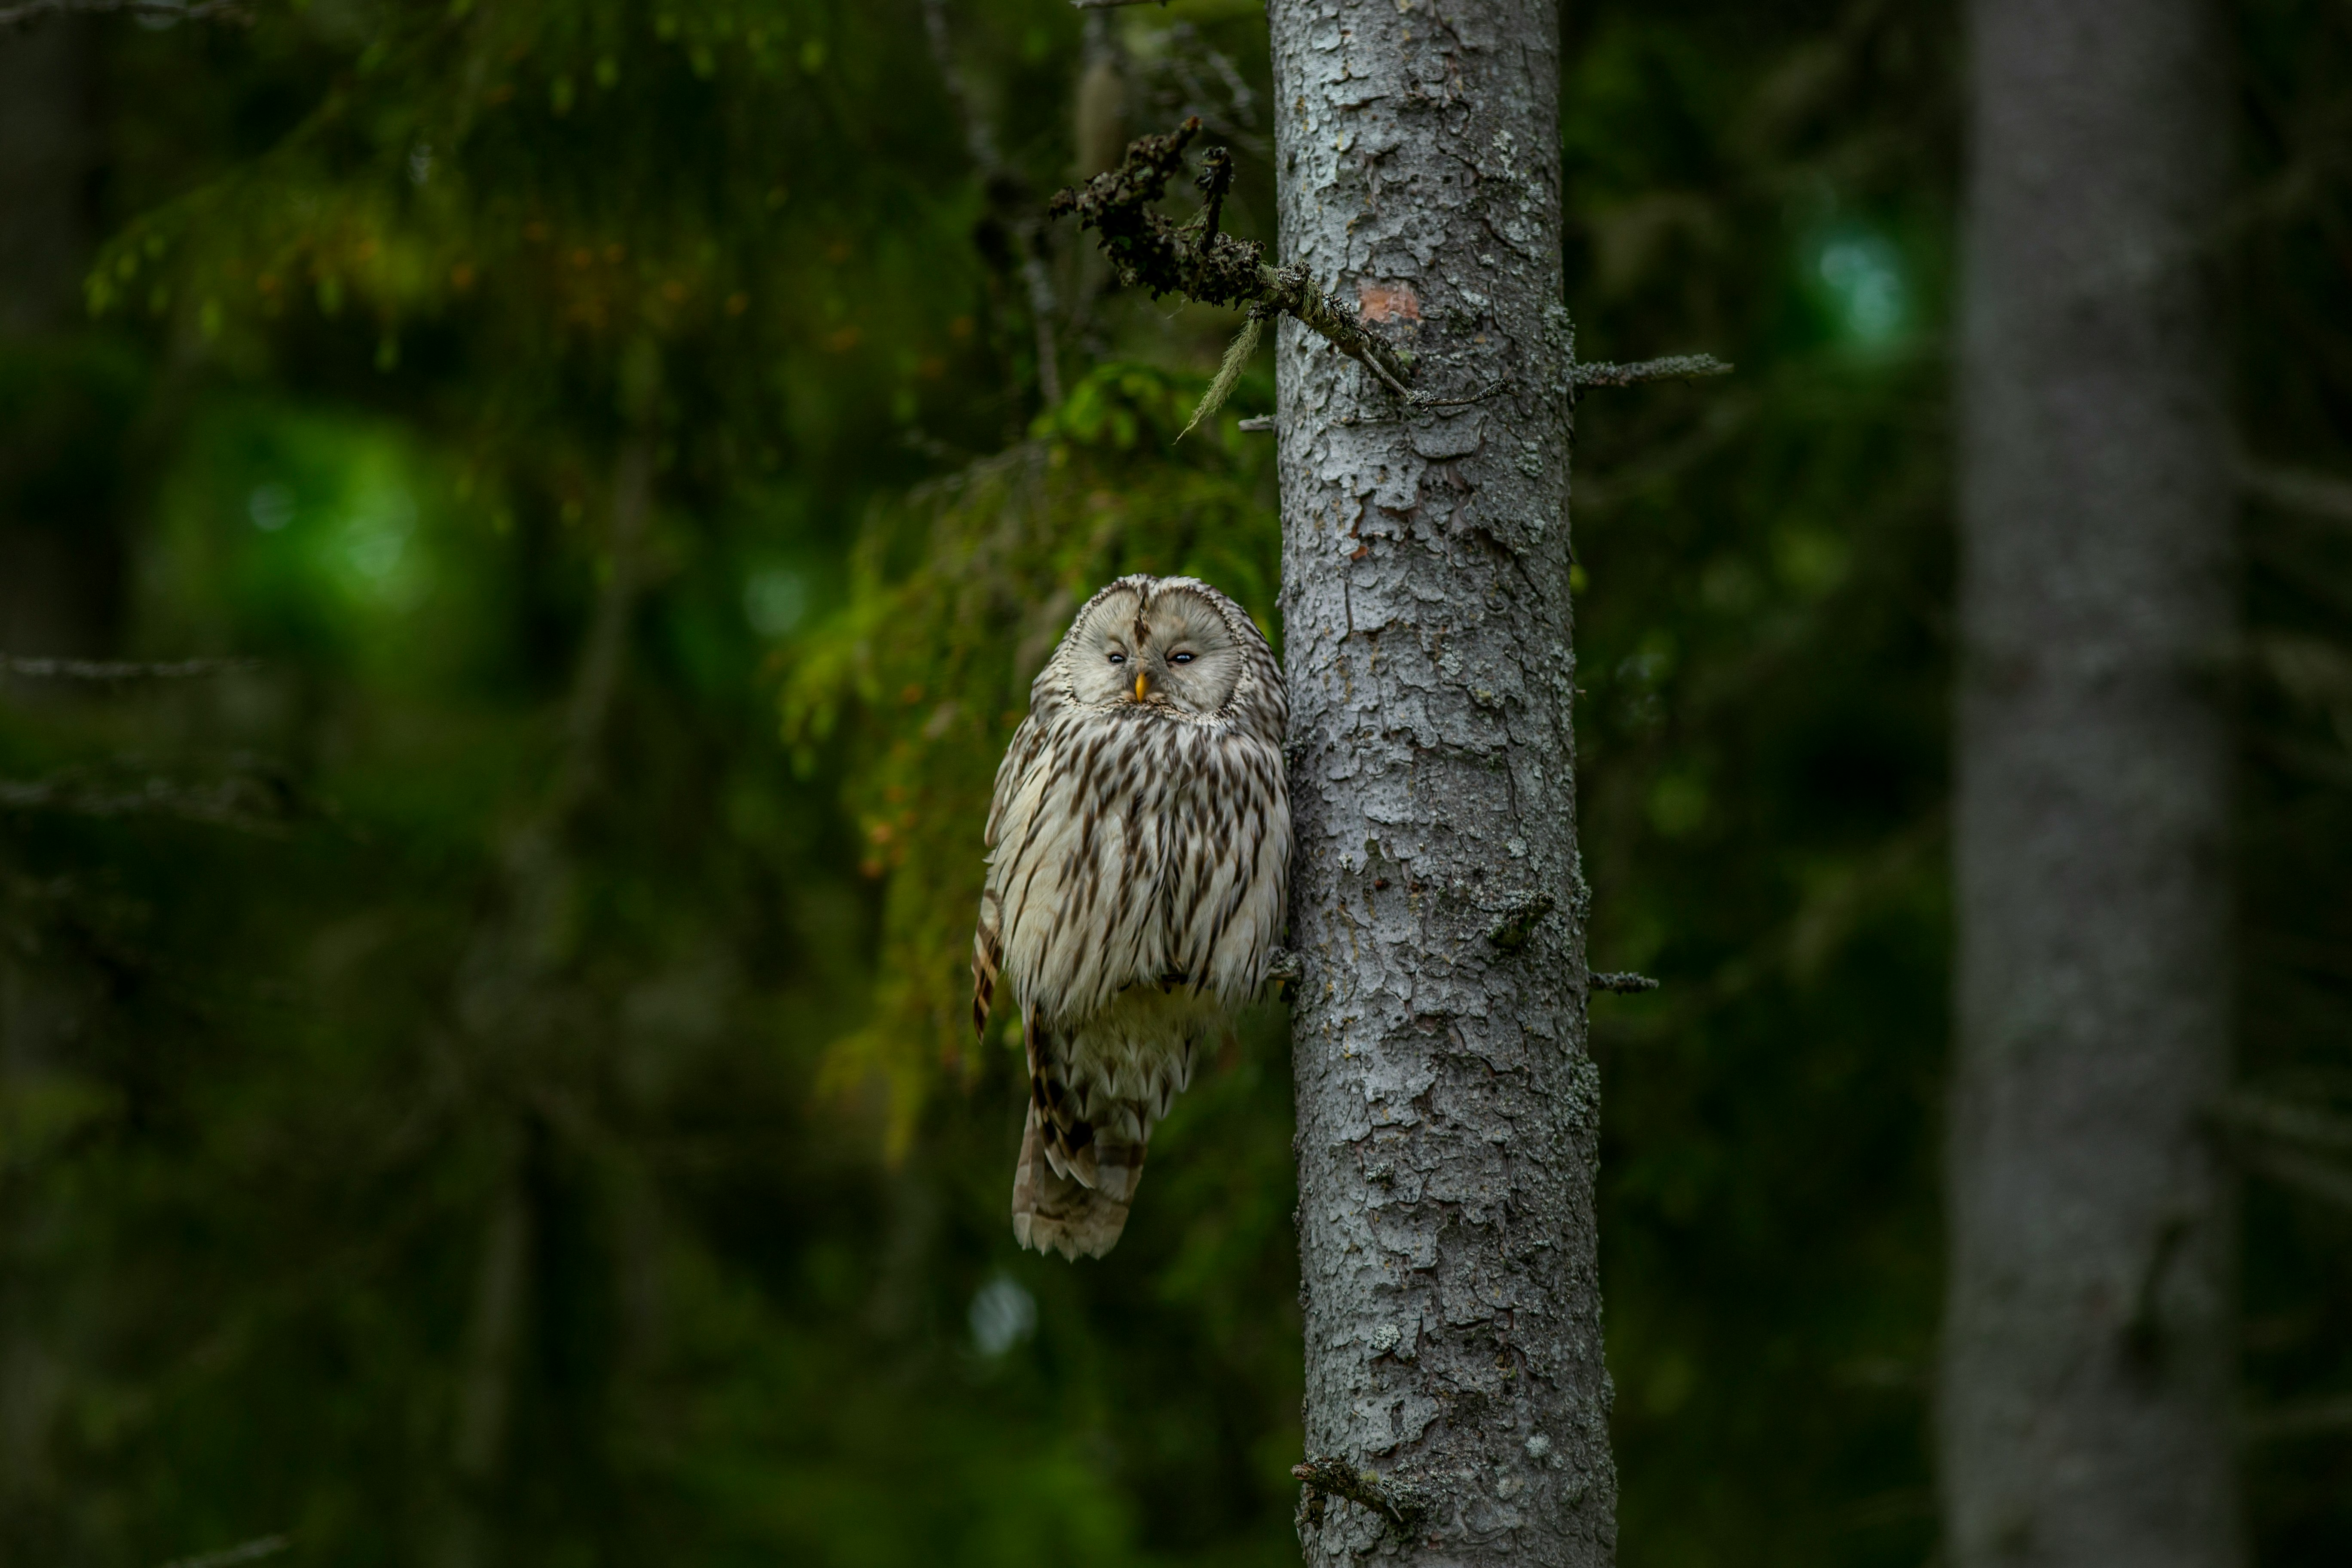 white and brown owl on tree branch during daytime